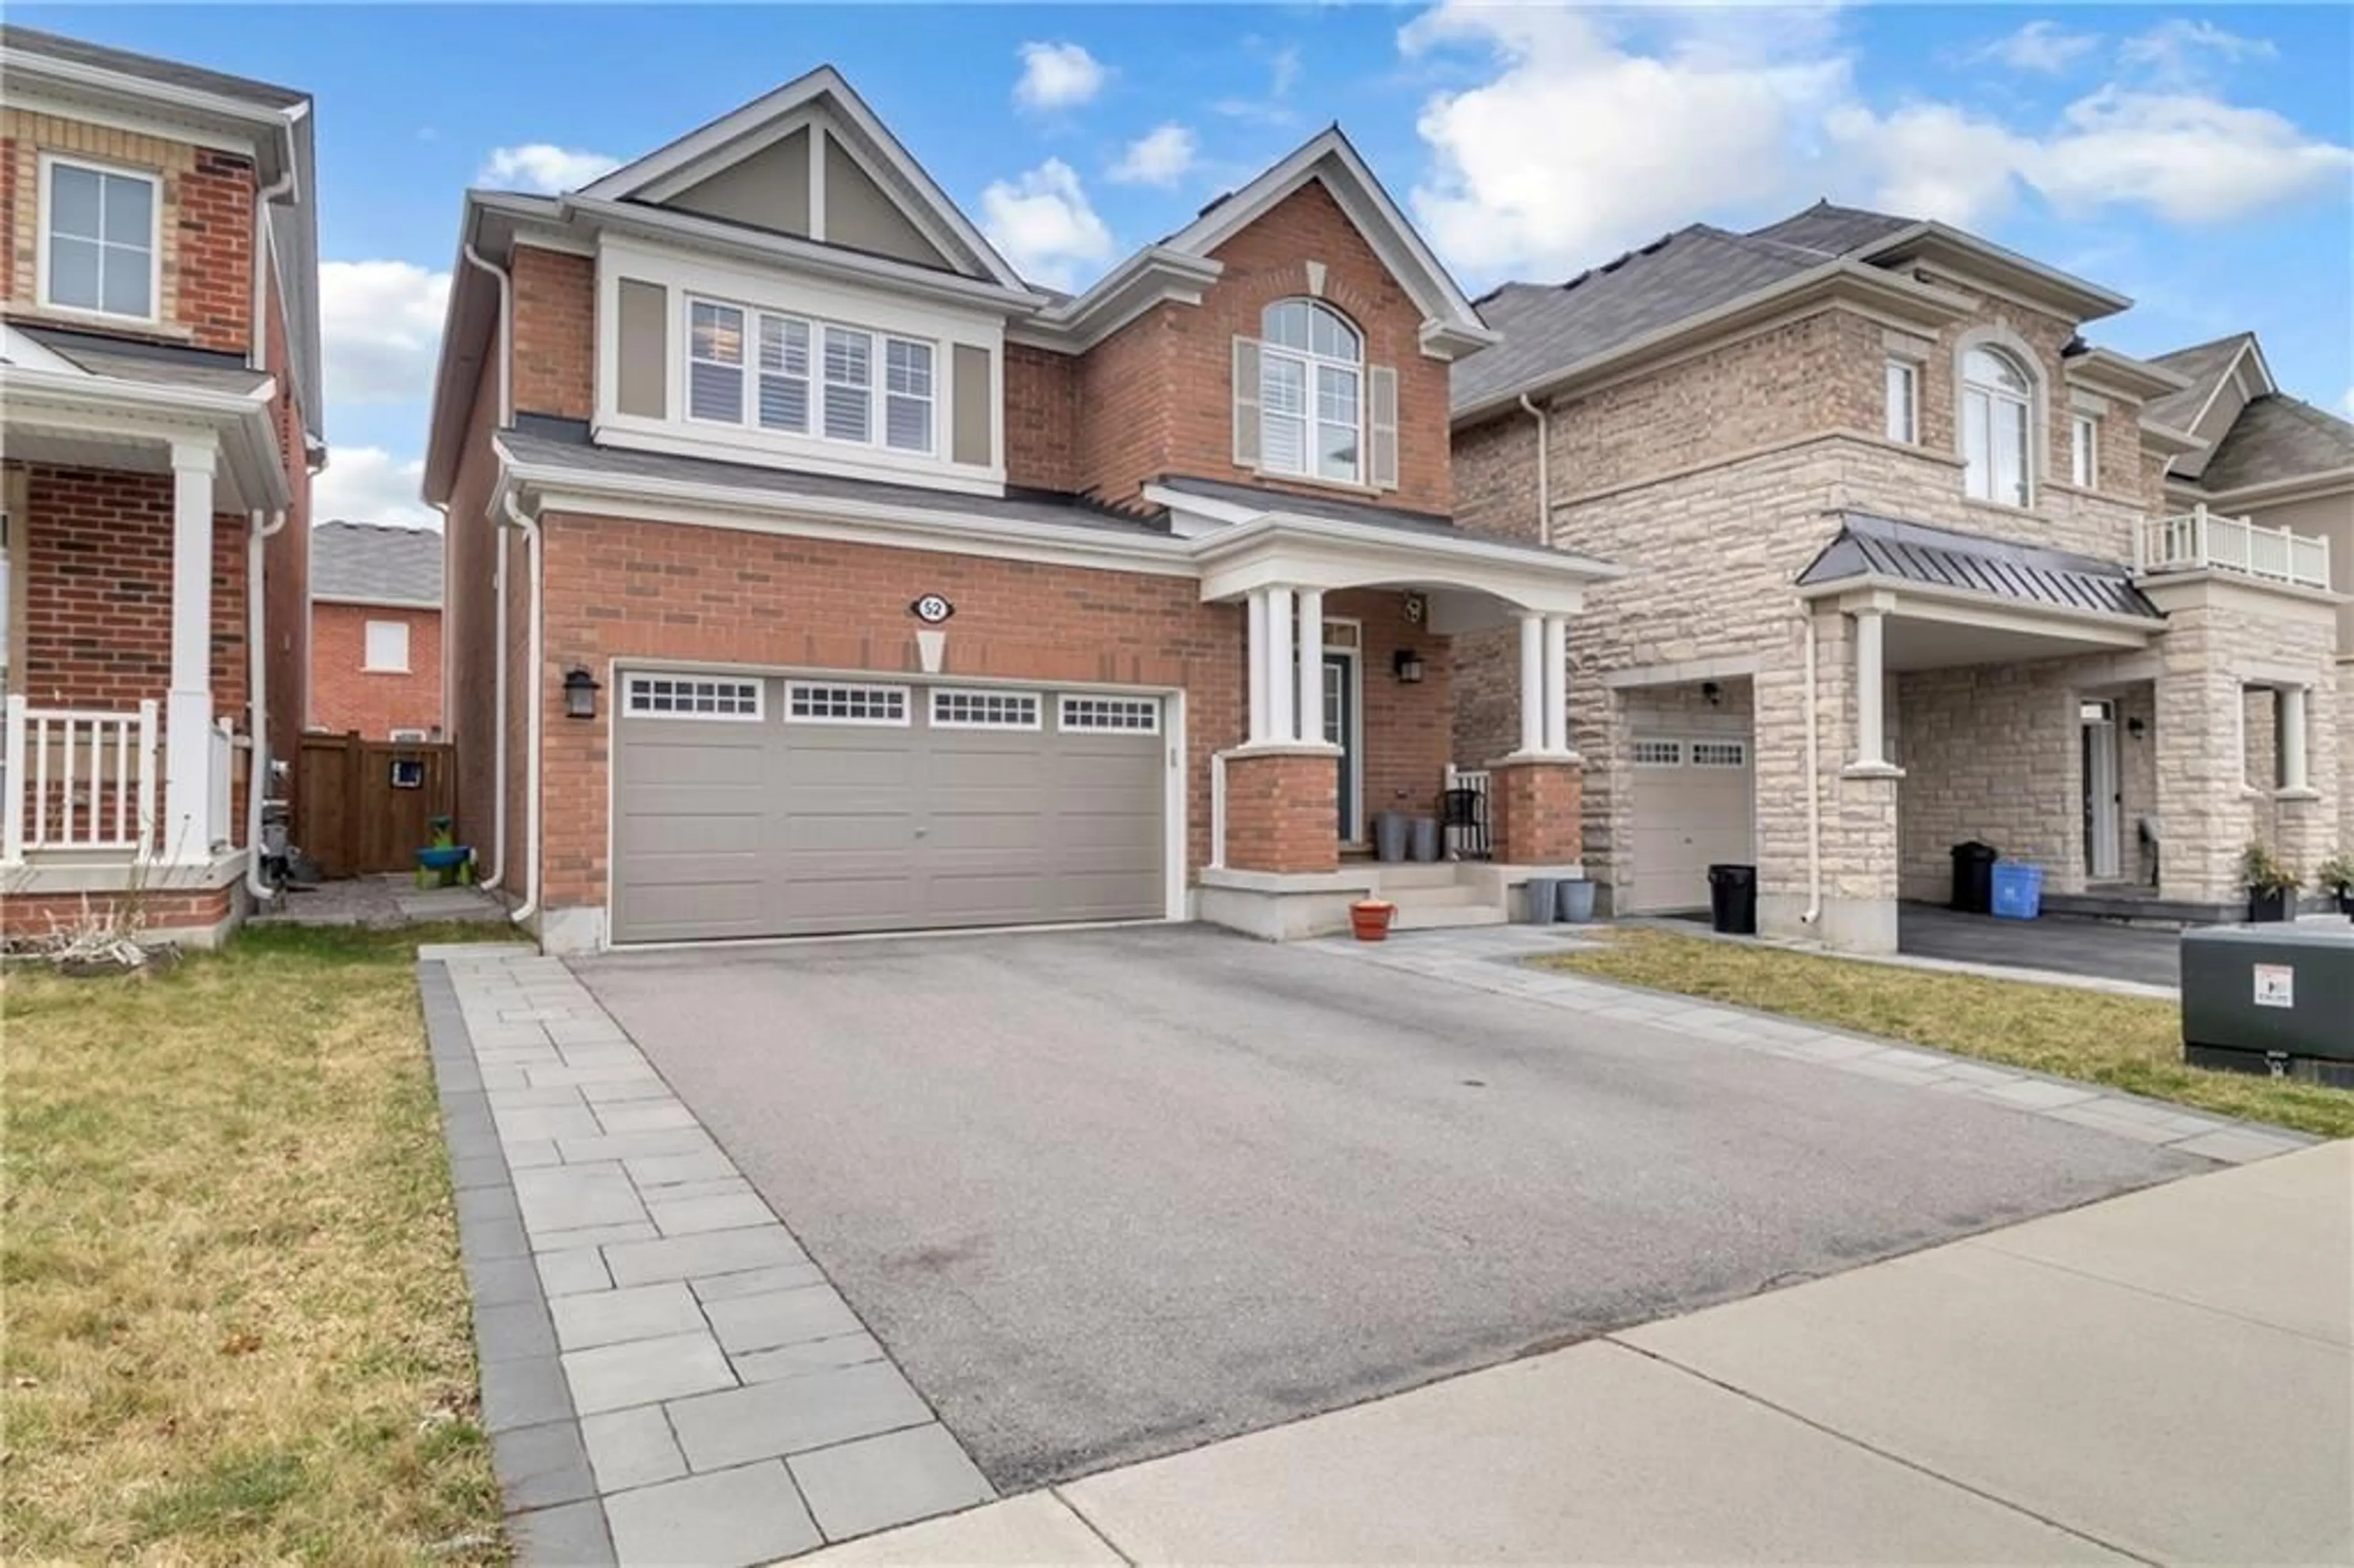 Home with brick exterior material for 52 Forest Ridge Ave, Waterdown Ontario L8B 1V5